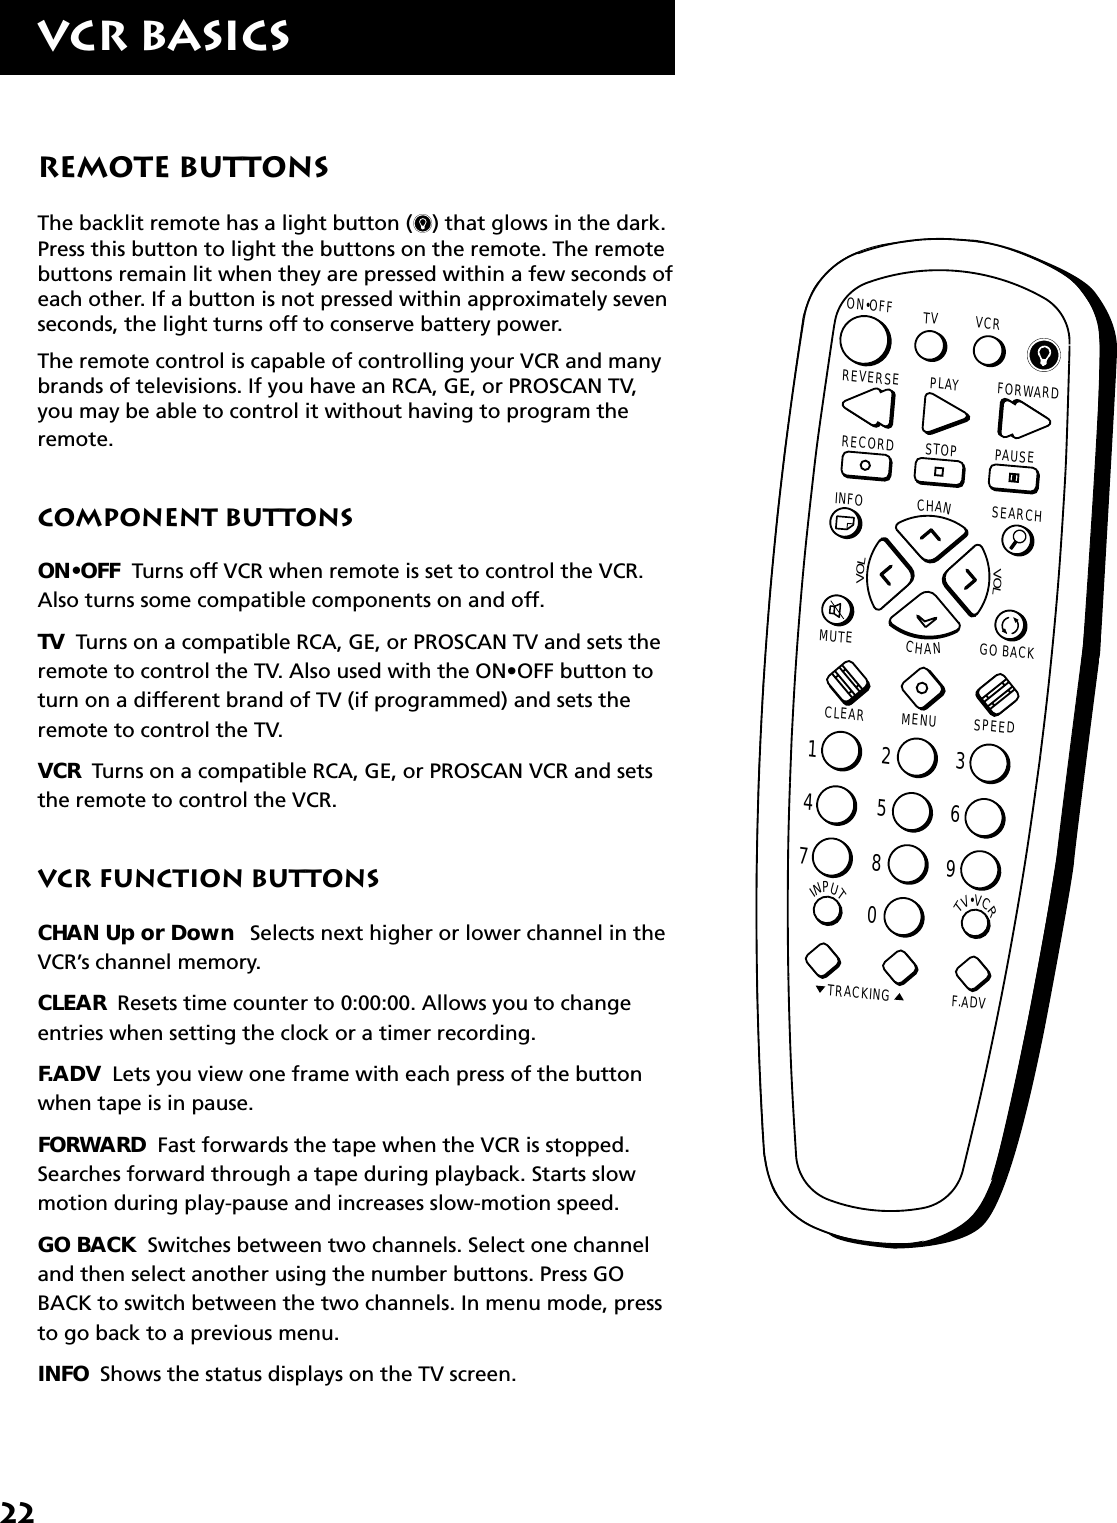 22VCR BasicsRemote ButtonsThe backlit remote has a light button ( ) that glows in the dark.Press this button to light the buttons on the remote. The remotebuttons remain lit when they are pressed within a few seconds ofeach other. If a button is not pressed within approximately sevenseconds, the light turns off to conserve battery power.The remote control is capable of controlling your VCR and manybrands of televisions. If you have an RCA, GE, or PROSCAN TV,you may be able to control it without having to program theremote.Component ButtonsON•OFF  Turns off VCR when remote is set to control the VCR.Also turns some compatible components on and off.TV  Turns on a compatible RCA, GE, or PROSCAN TV and sets theremote to control the TV. Also used with the ON•OFF button toturn on a different brand of TV (if programmed) and sets theremote to control the TV.VCR  Turns on a compatible RCA, GE, or PROSCAN VCR and setsthe remote to control the VCR.VCR Function ButtonsCHAN Up or Down    Selects next higher or lower channel in theVCR’s channel memory.CLEAR  Resets time counter to 0:00:00. Allows you to changeentries when setting the clock or a timer recording.F.ADV  Lets you view one frame with each press of the buttonwhen tape is in pause.FORWARD  Fast forwards the tape when the VCR is stopped.Searches forward through a tape during playback. Starts slowmotion during play-pause and increases slow-motion speed.GO BACK  Switches between two channels. Select one channeland then select another using the number buttons. Press GOBACK to switch between the two channels. In menu mode, pressto go back to a previous menu.INFO  Shows the status displays on the TV screen.INPUTTV•VCRON•OFFPLAY FORWARDRECORD STOP PAUSEF.ADVCLEAR MENU SPEEDTRACKING1472583690CHANVOLVOLCHANINFO SEARCHMUTE GO BACK TV VCRREVERSE